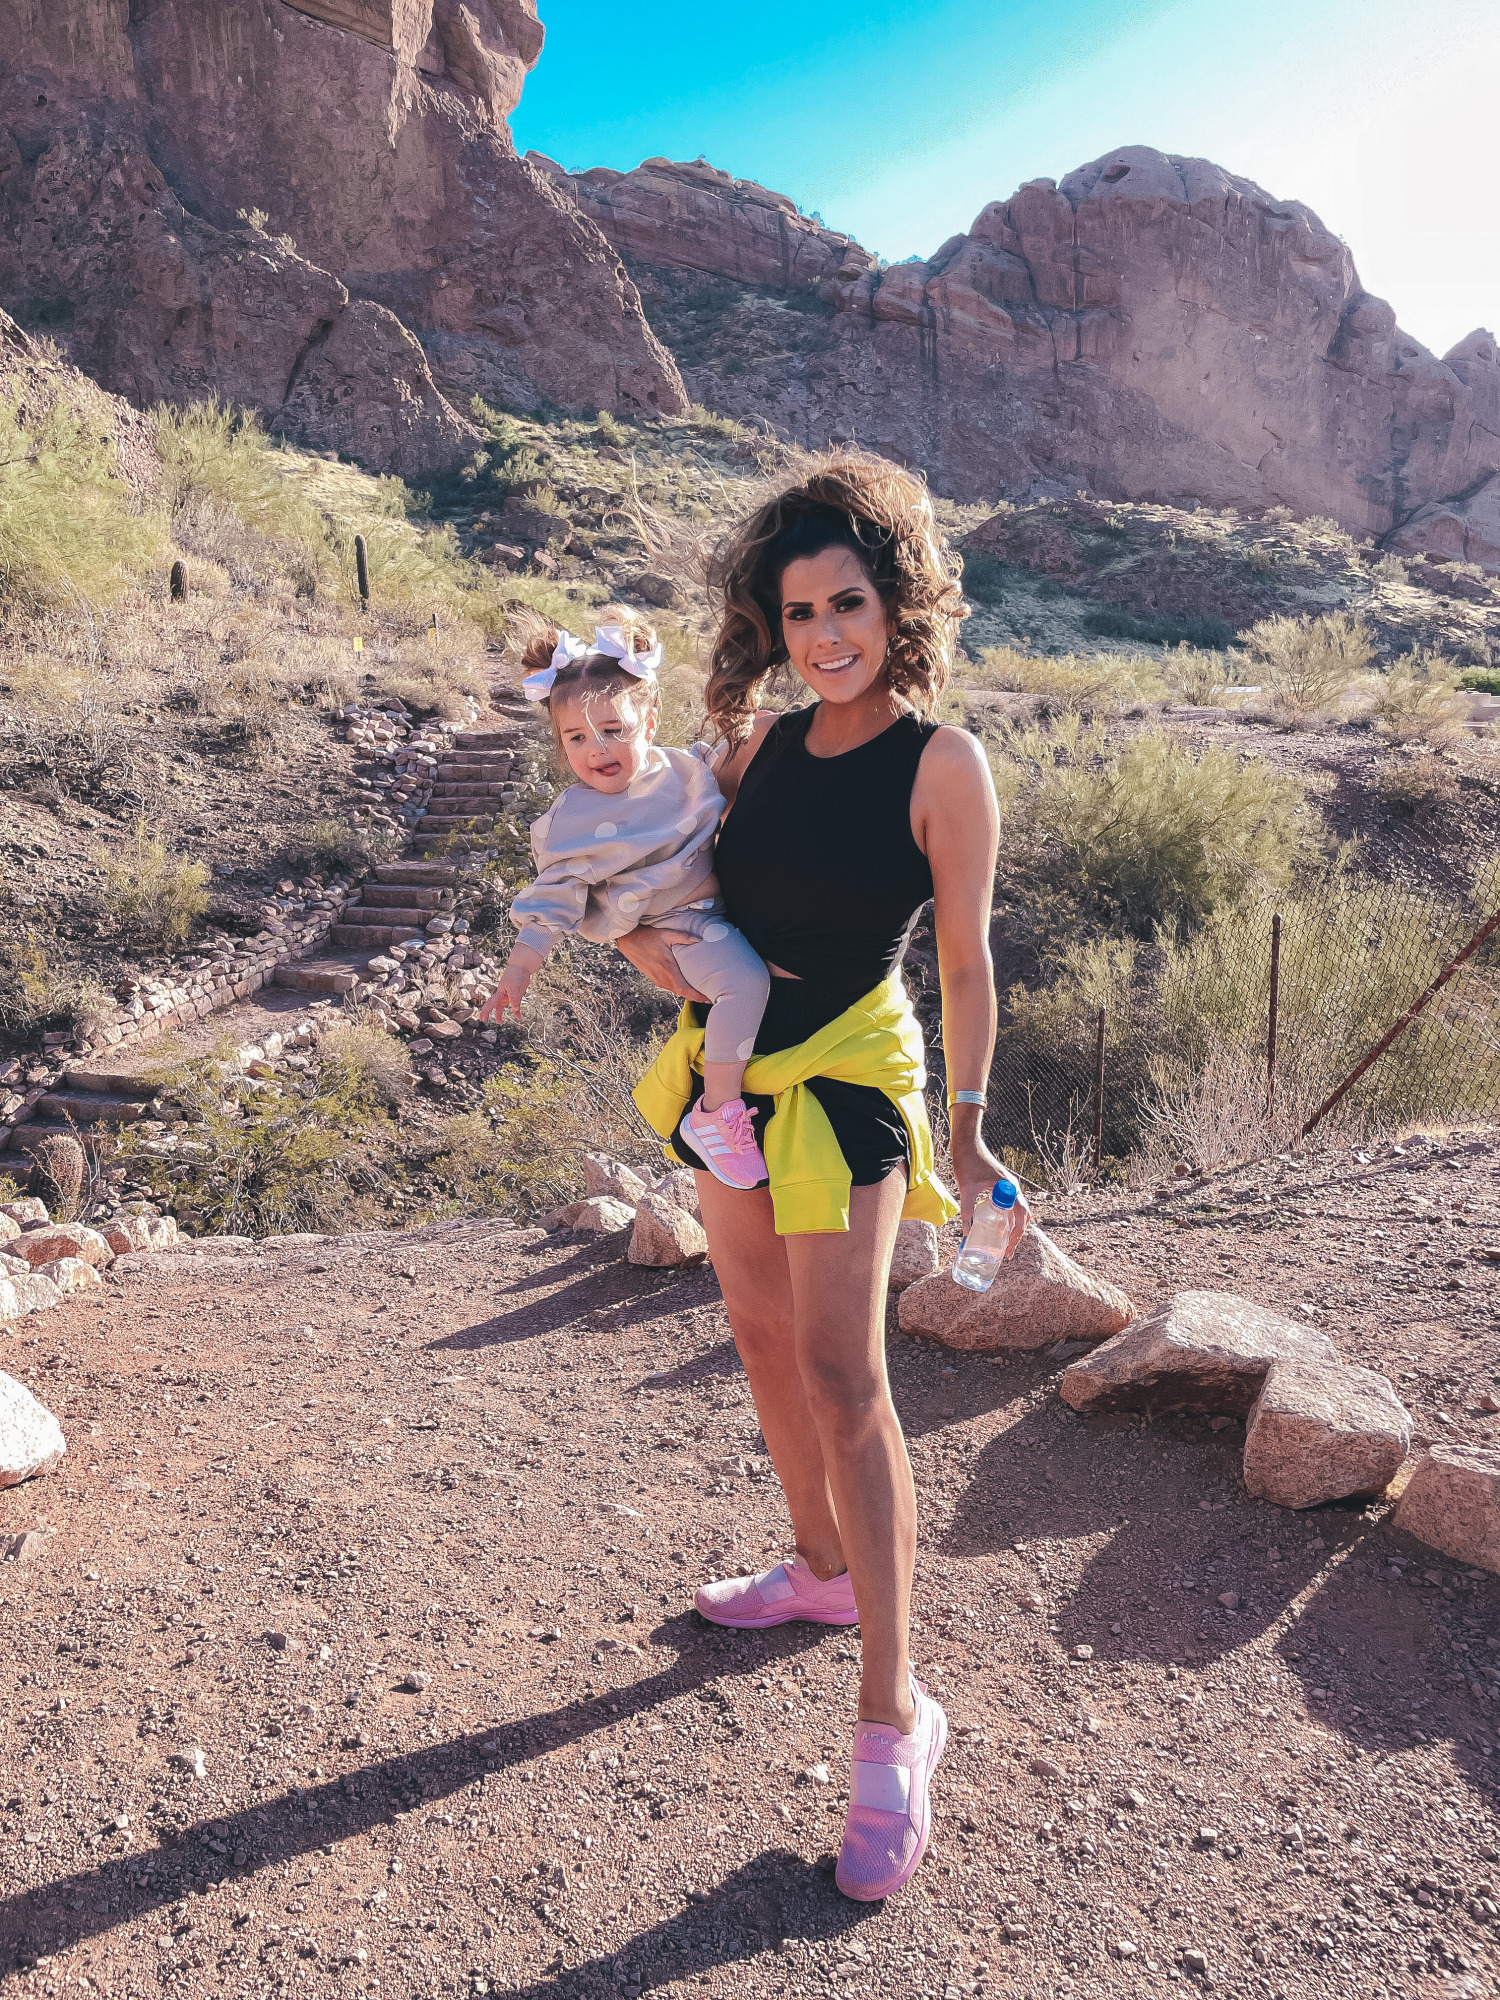 free people shorts, best workout gear spring 2021, camelback mountain, alo yoga top, emily gemma12 |Hiking Outfits by popular US fashion blog, The Sweetest Thing: image of Emily Gemma wearing a Alo yoga top, Nike half zipper pullover sweatshirt, Free People shorts, APL sneakers and Amazon sunglasses while holding her daughter Sophie who's wearing a grey and white polka dot lounge set, sneakers, and matching white hair bows. 